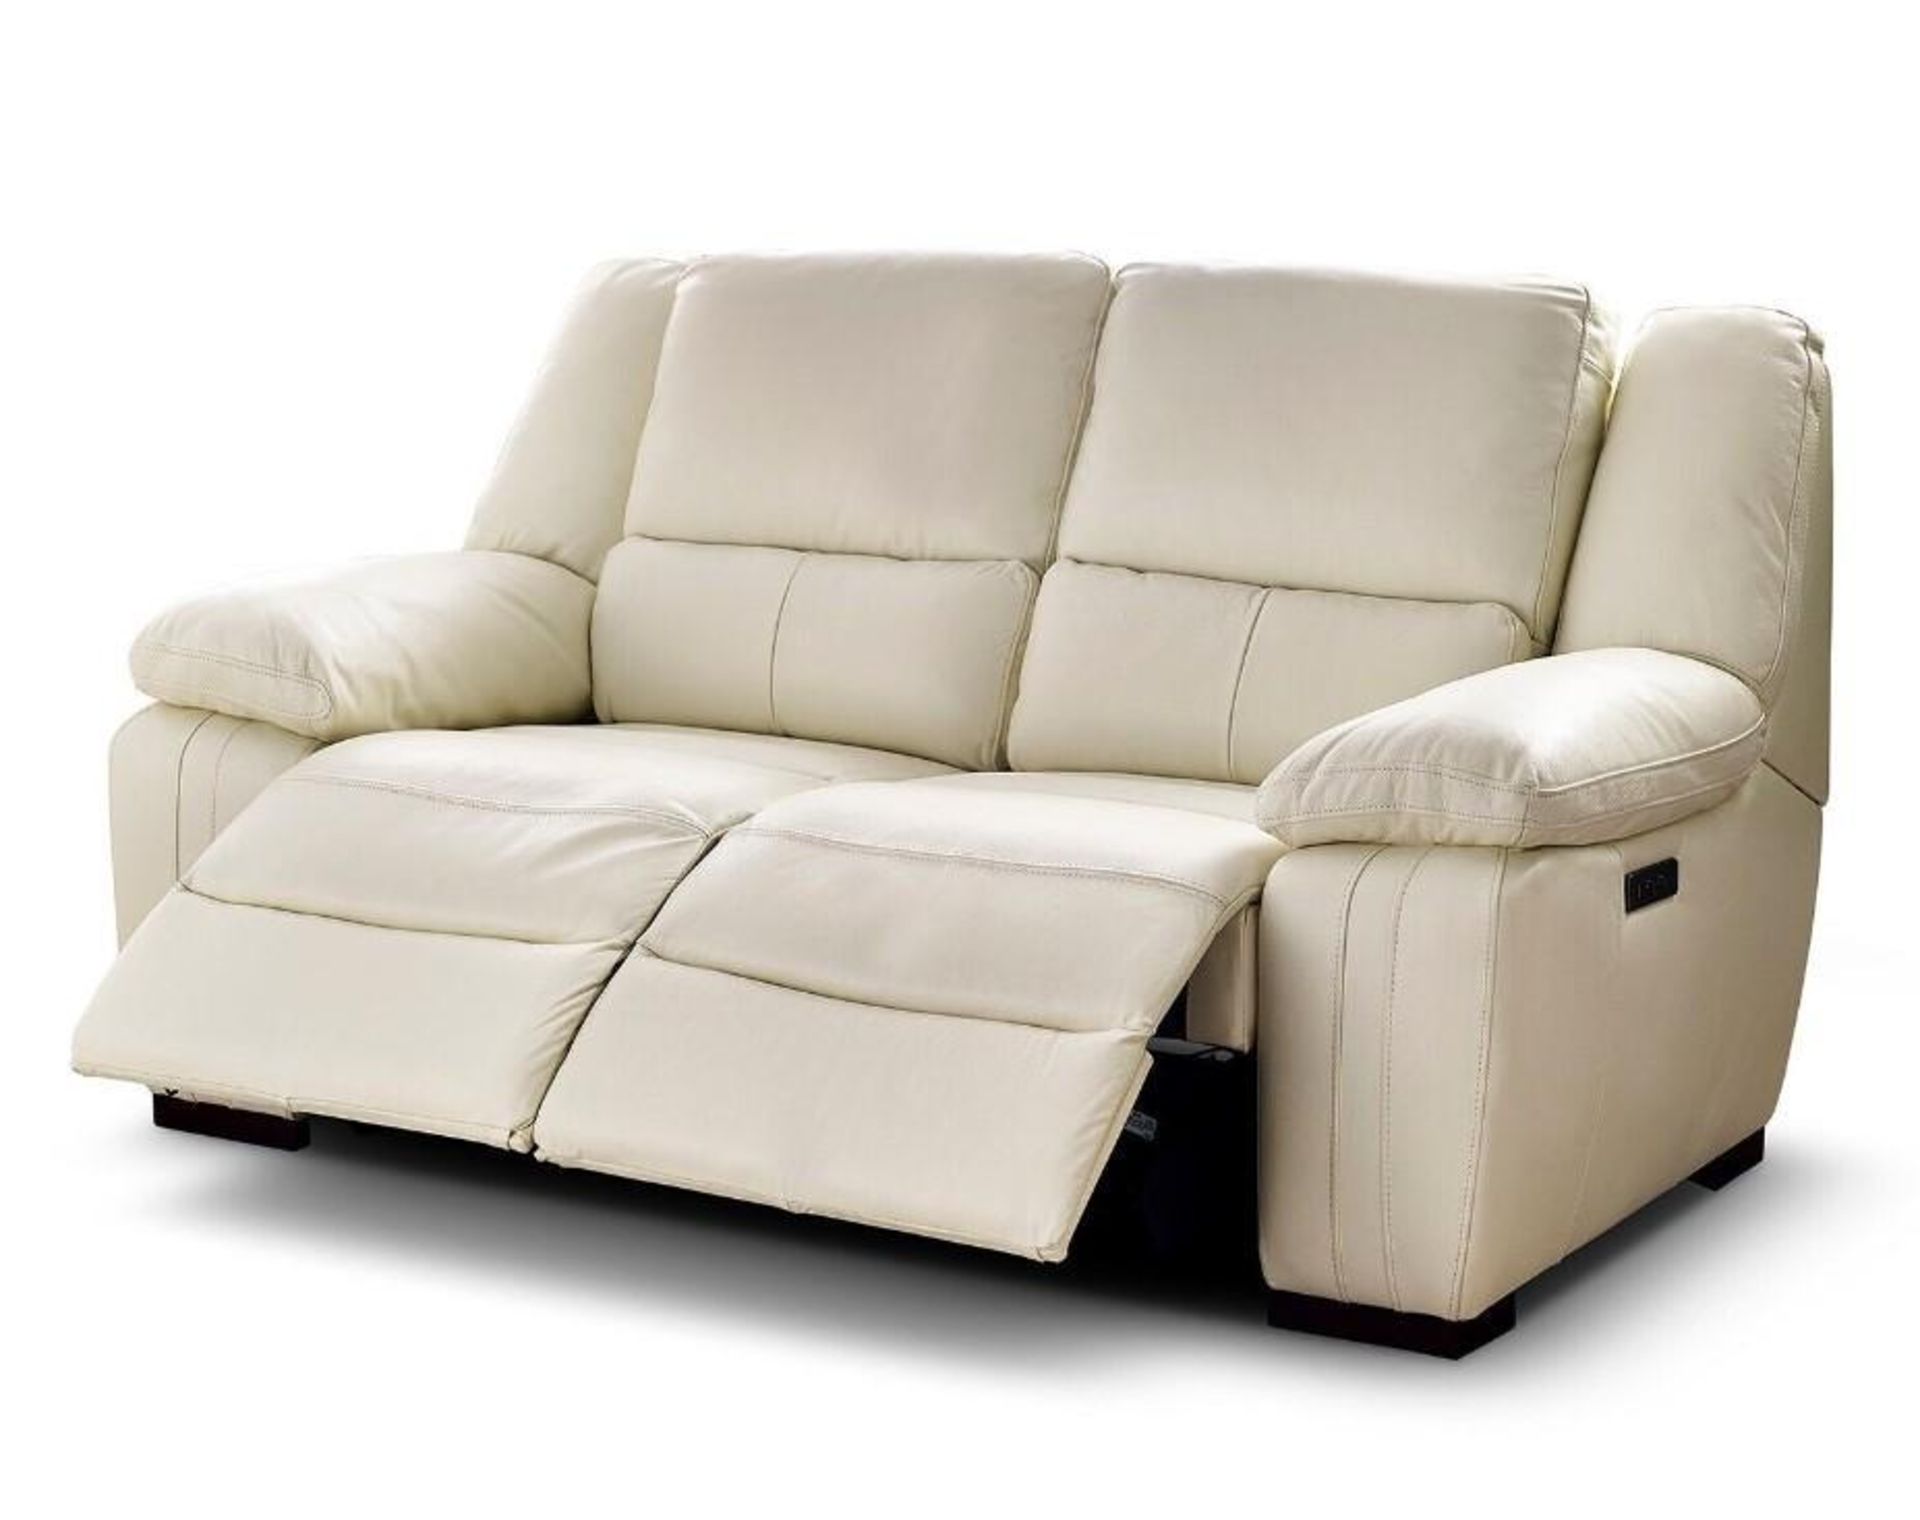 Brand new and boxed SCS Fallon 3 + 2 seater electric reclining sofa in Cream. - Bild 3 aus 7